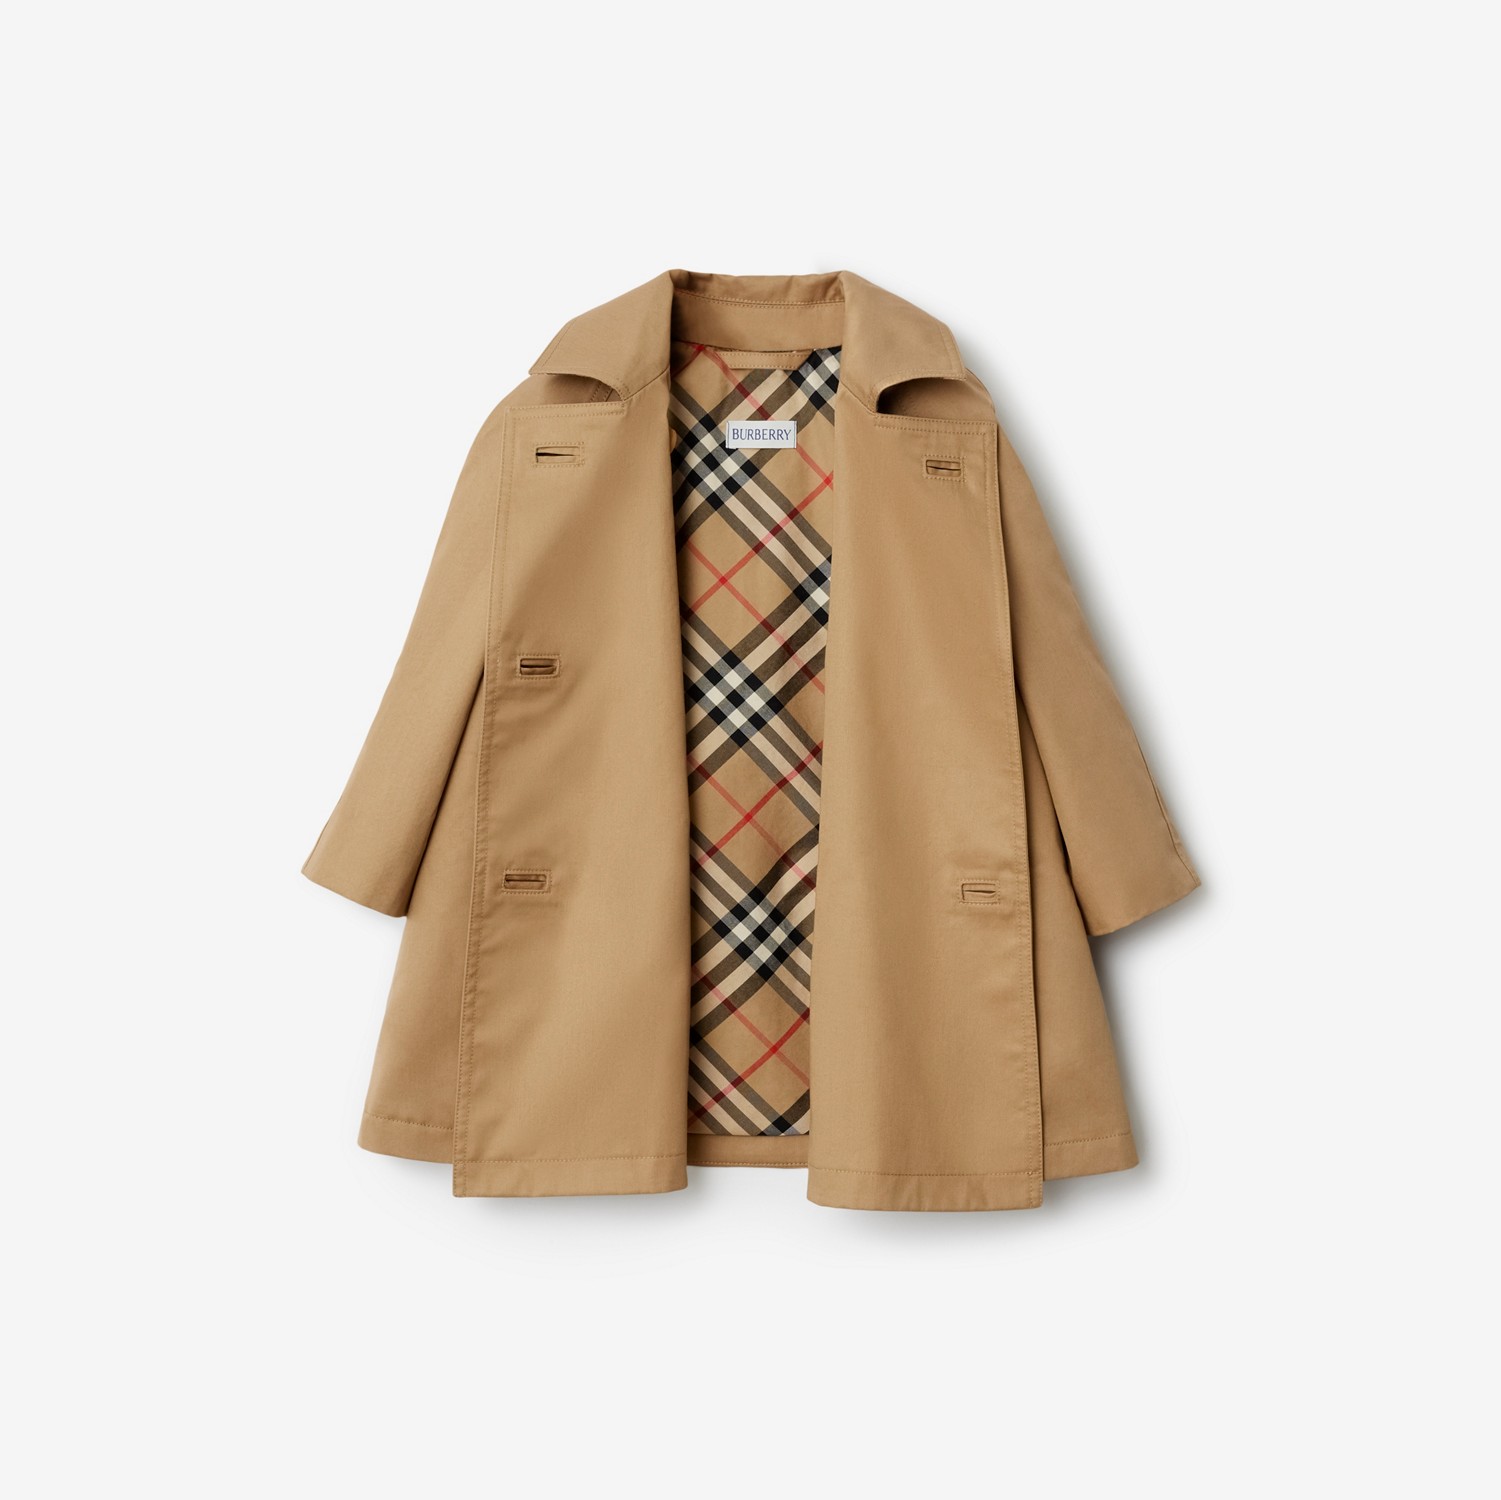 Trench coat in cotone